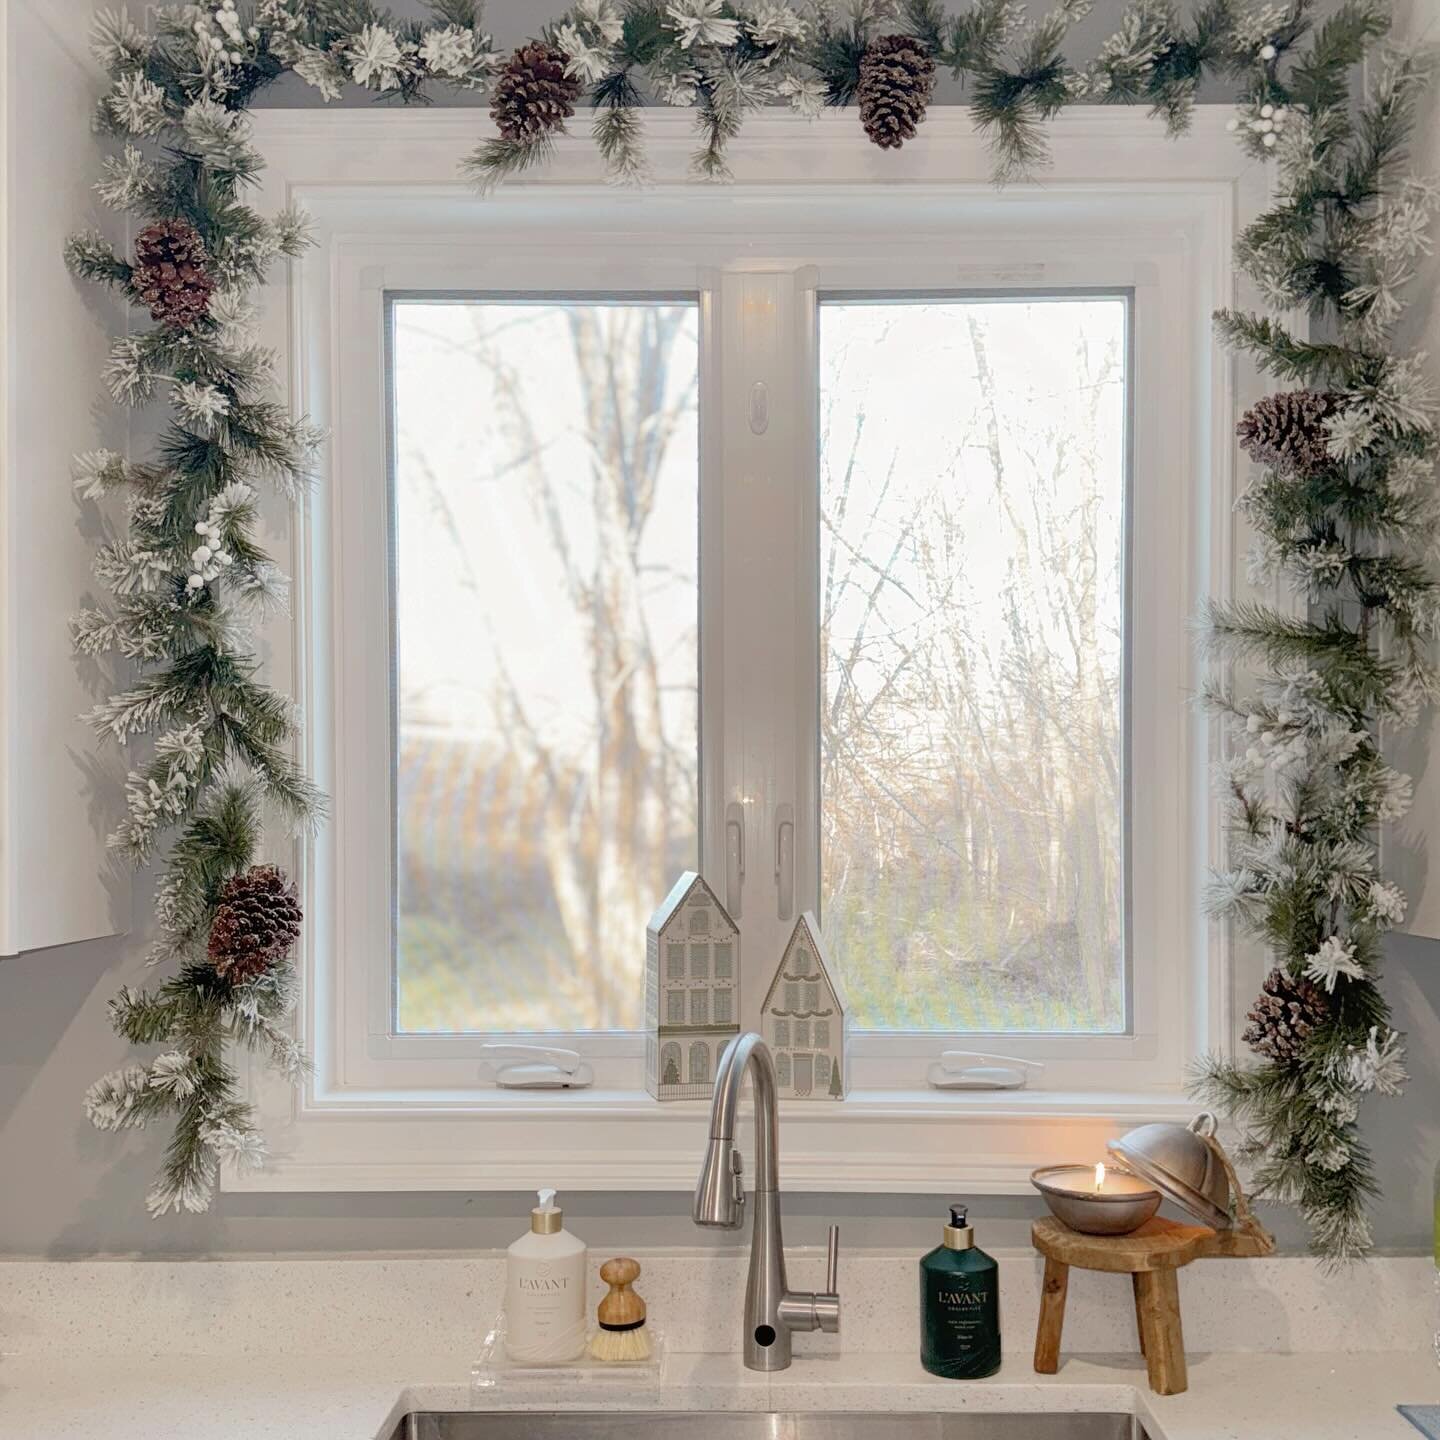 Christmas in the heart of the home 🤍

Festive touches in every corner helping us welcome this joyful season with the magical scent of winter fir filling the kitchen from @lavantcollective 🌲 

If you&rsquo;re looking to make the switch to plant base